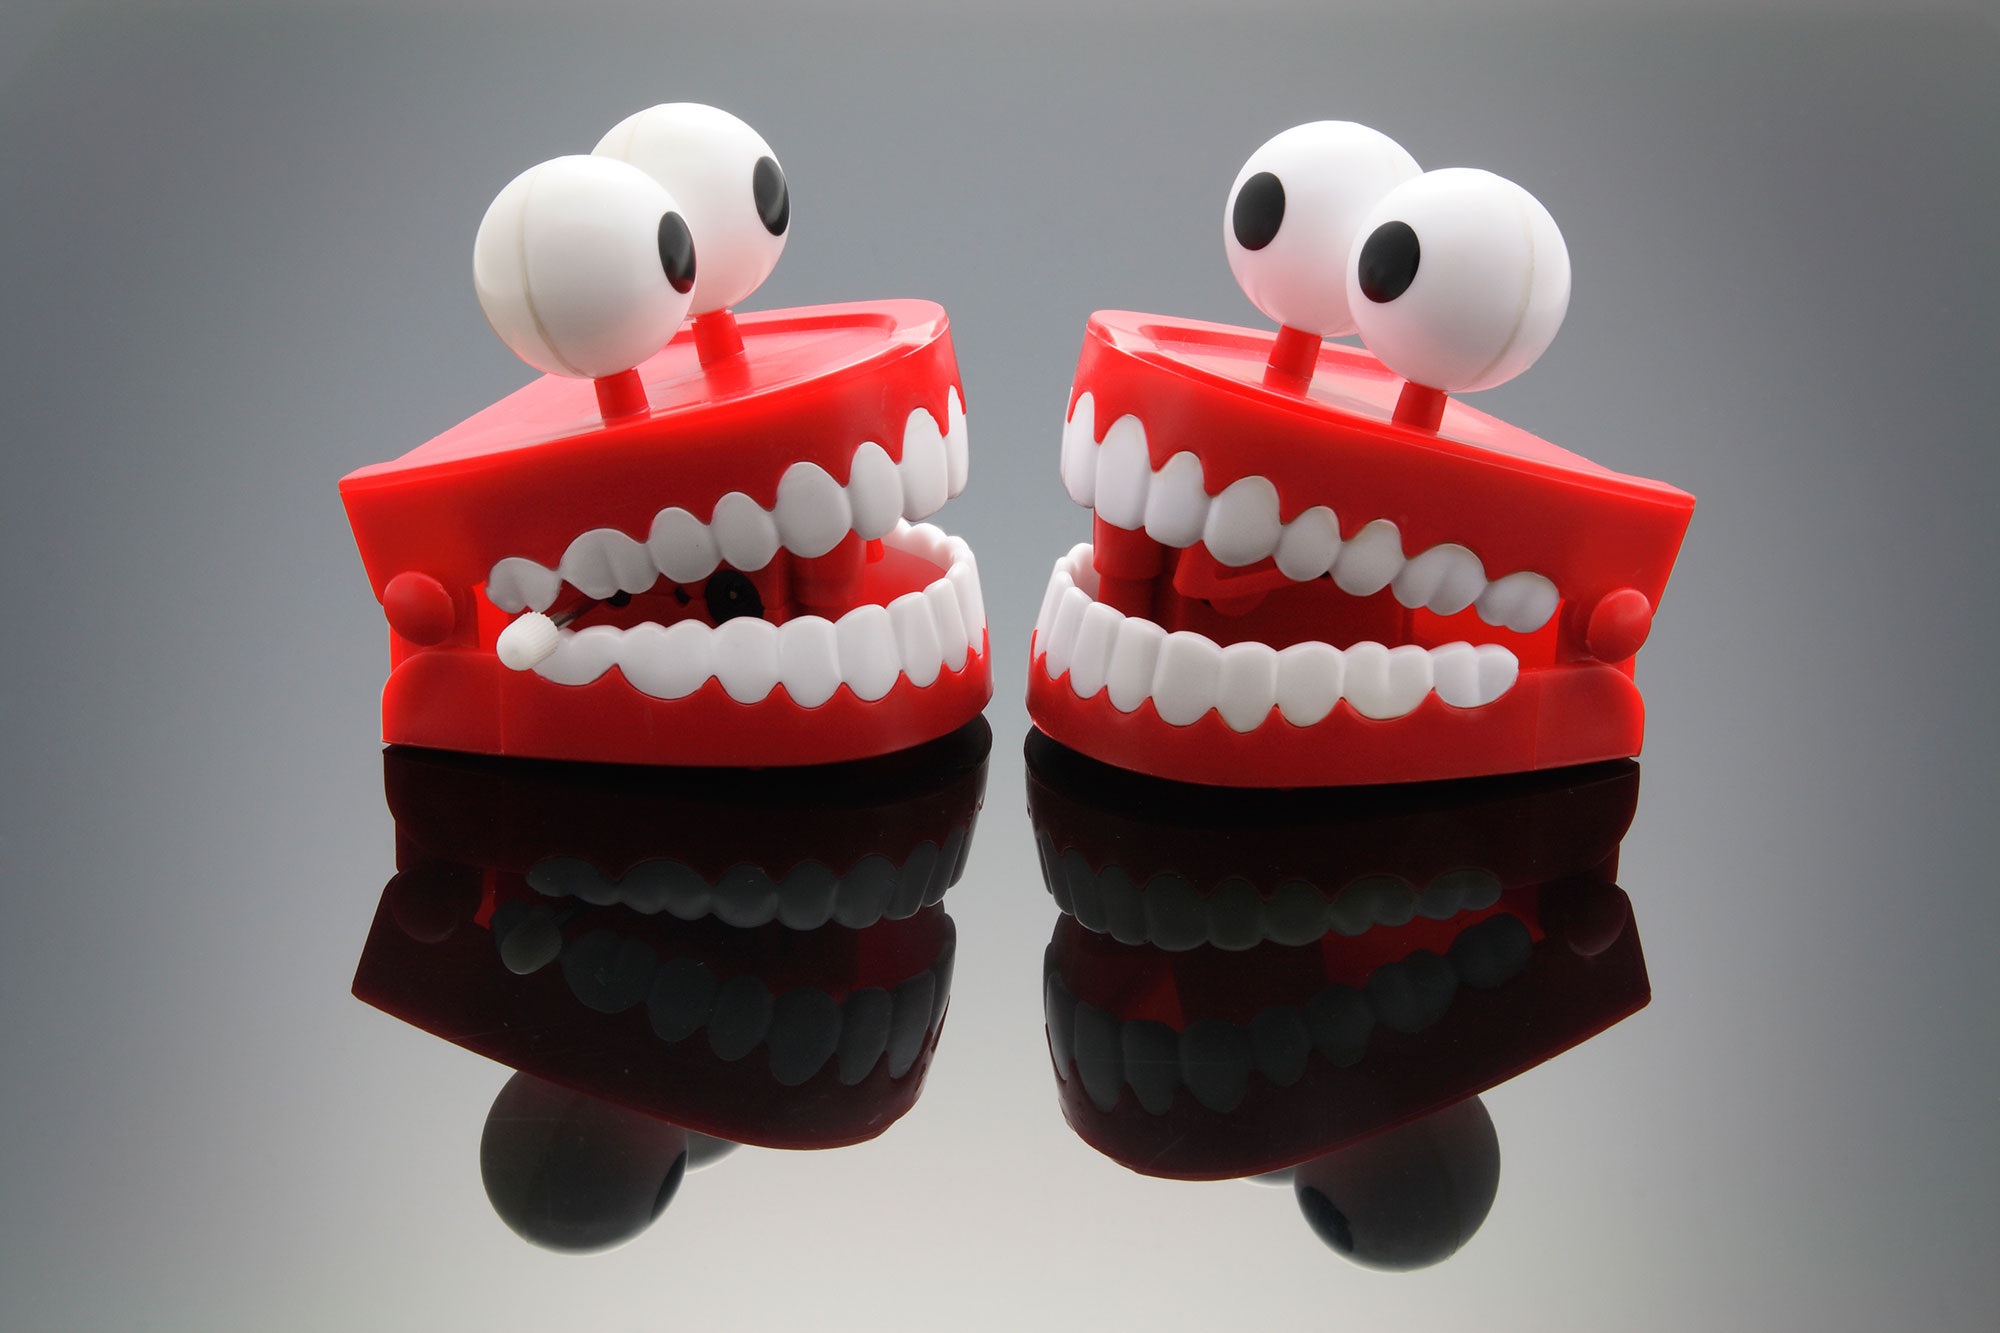 8 Shocking Facts About Teeth - 2 Are Particularly Strange.